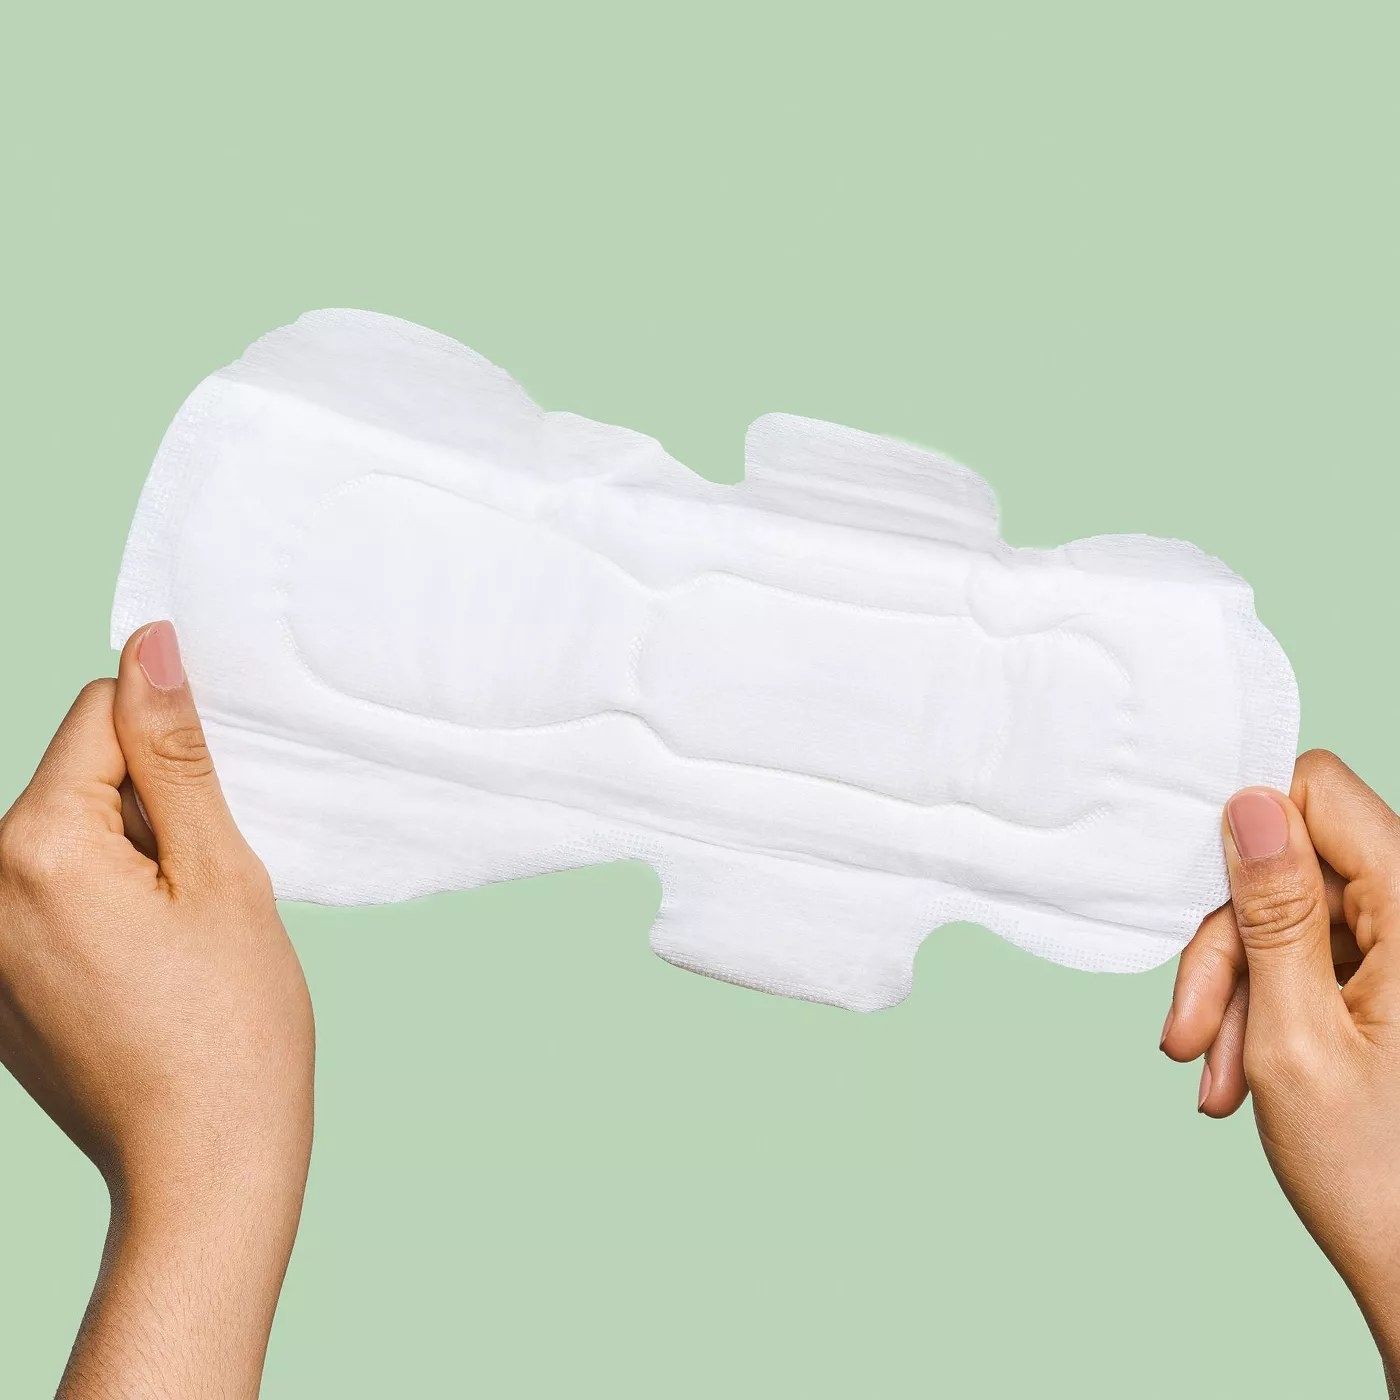 A model holding a menstrual pad lengthwise to show the wings and the shape of the pad